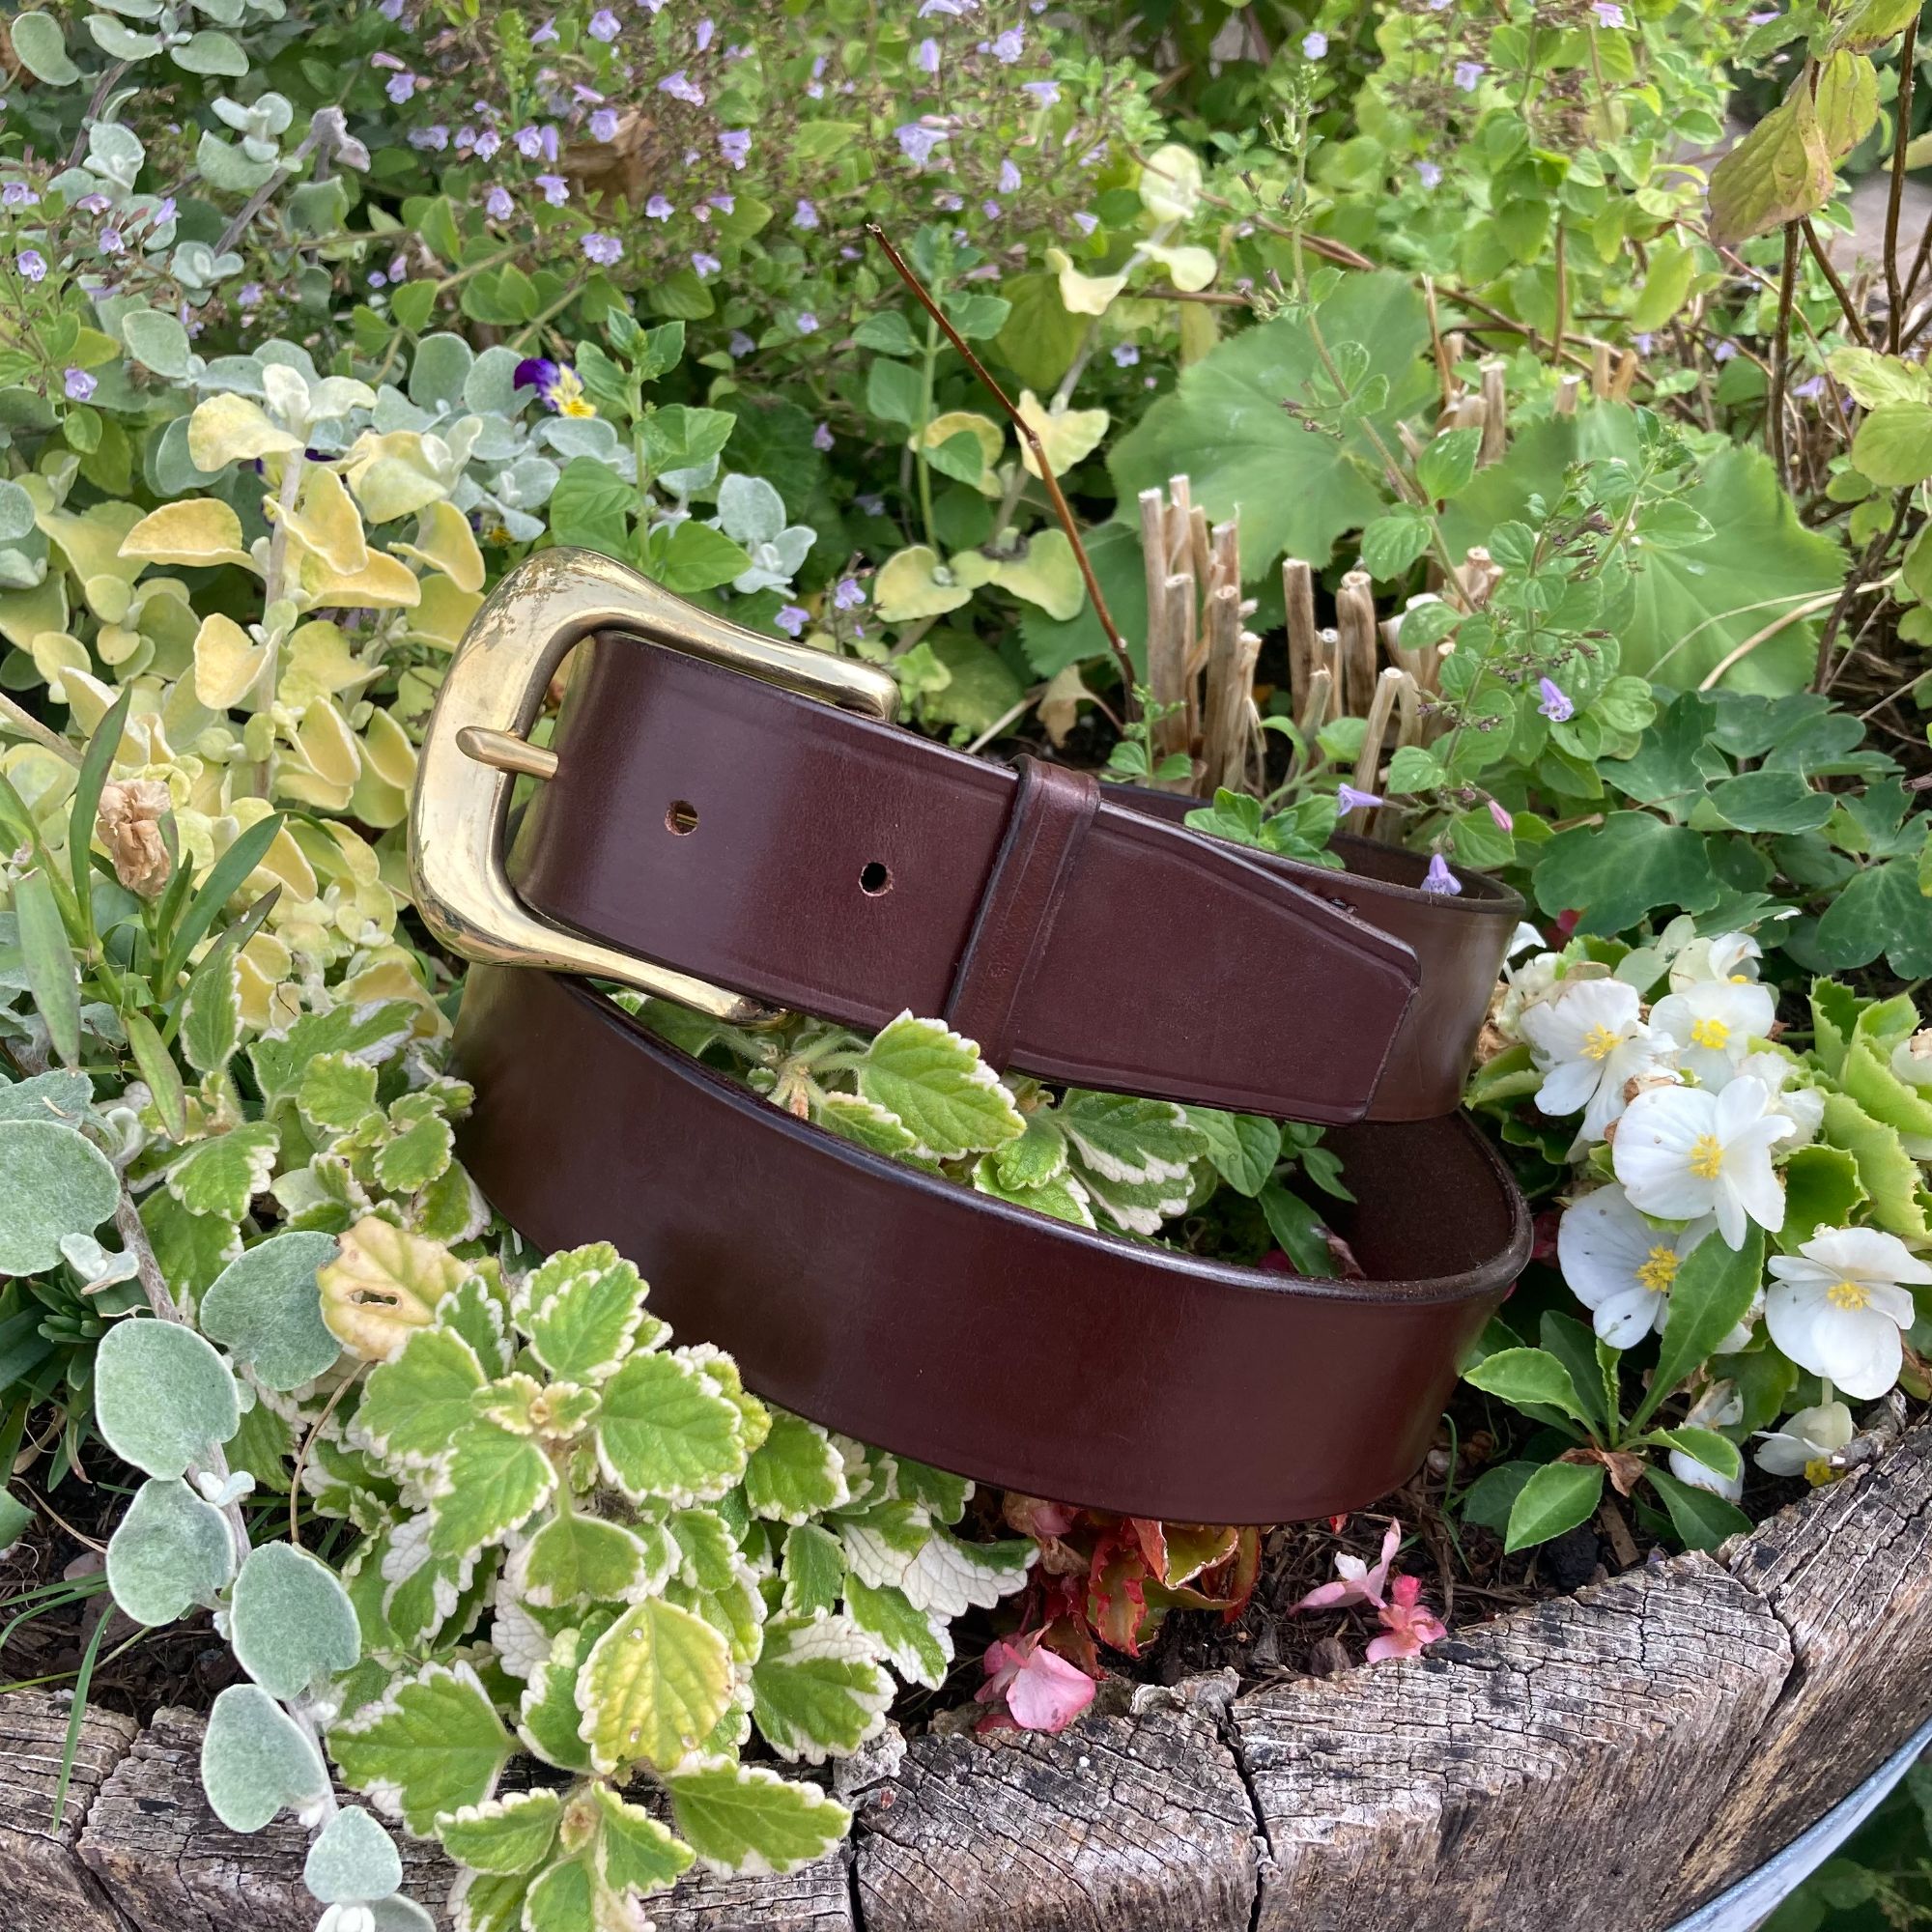 Australian Nut leather with Swelled west end buckle